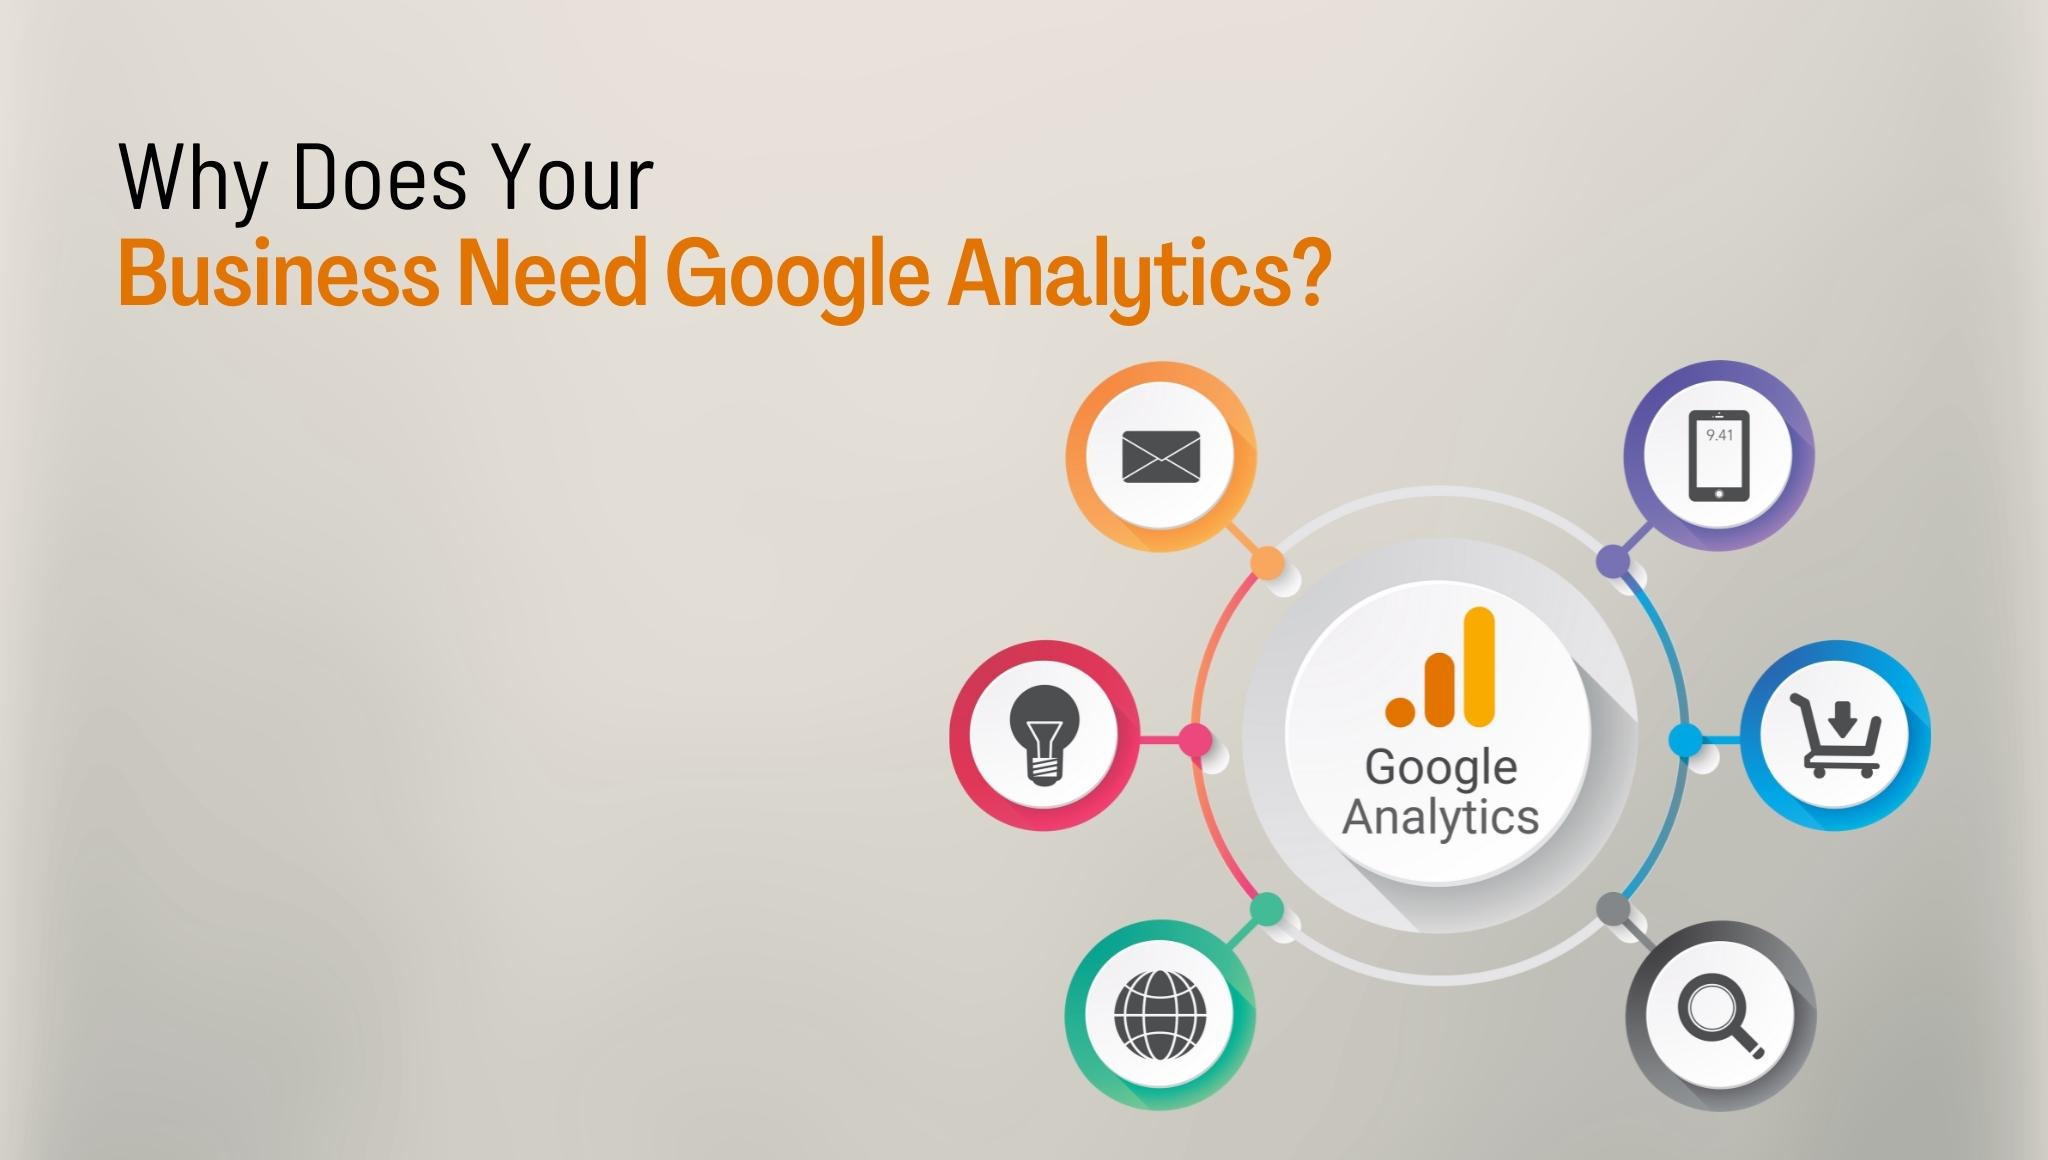 Why Does Your Business Need Google Analytics